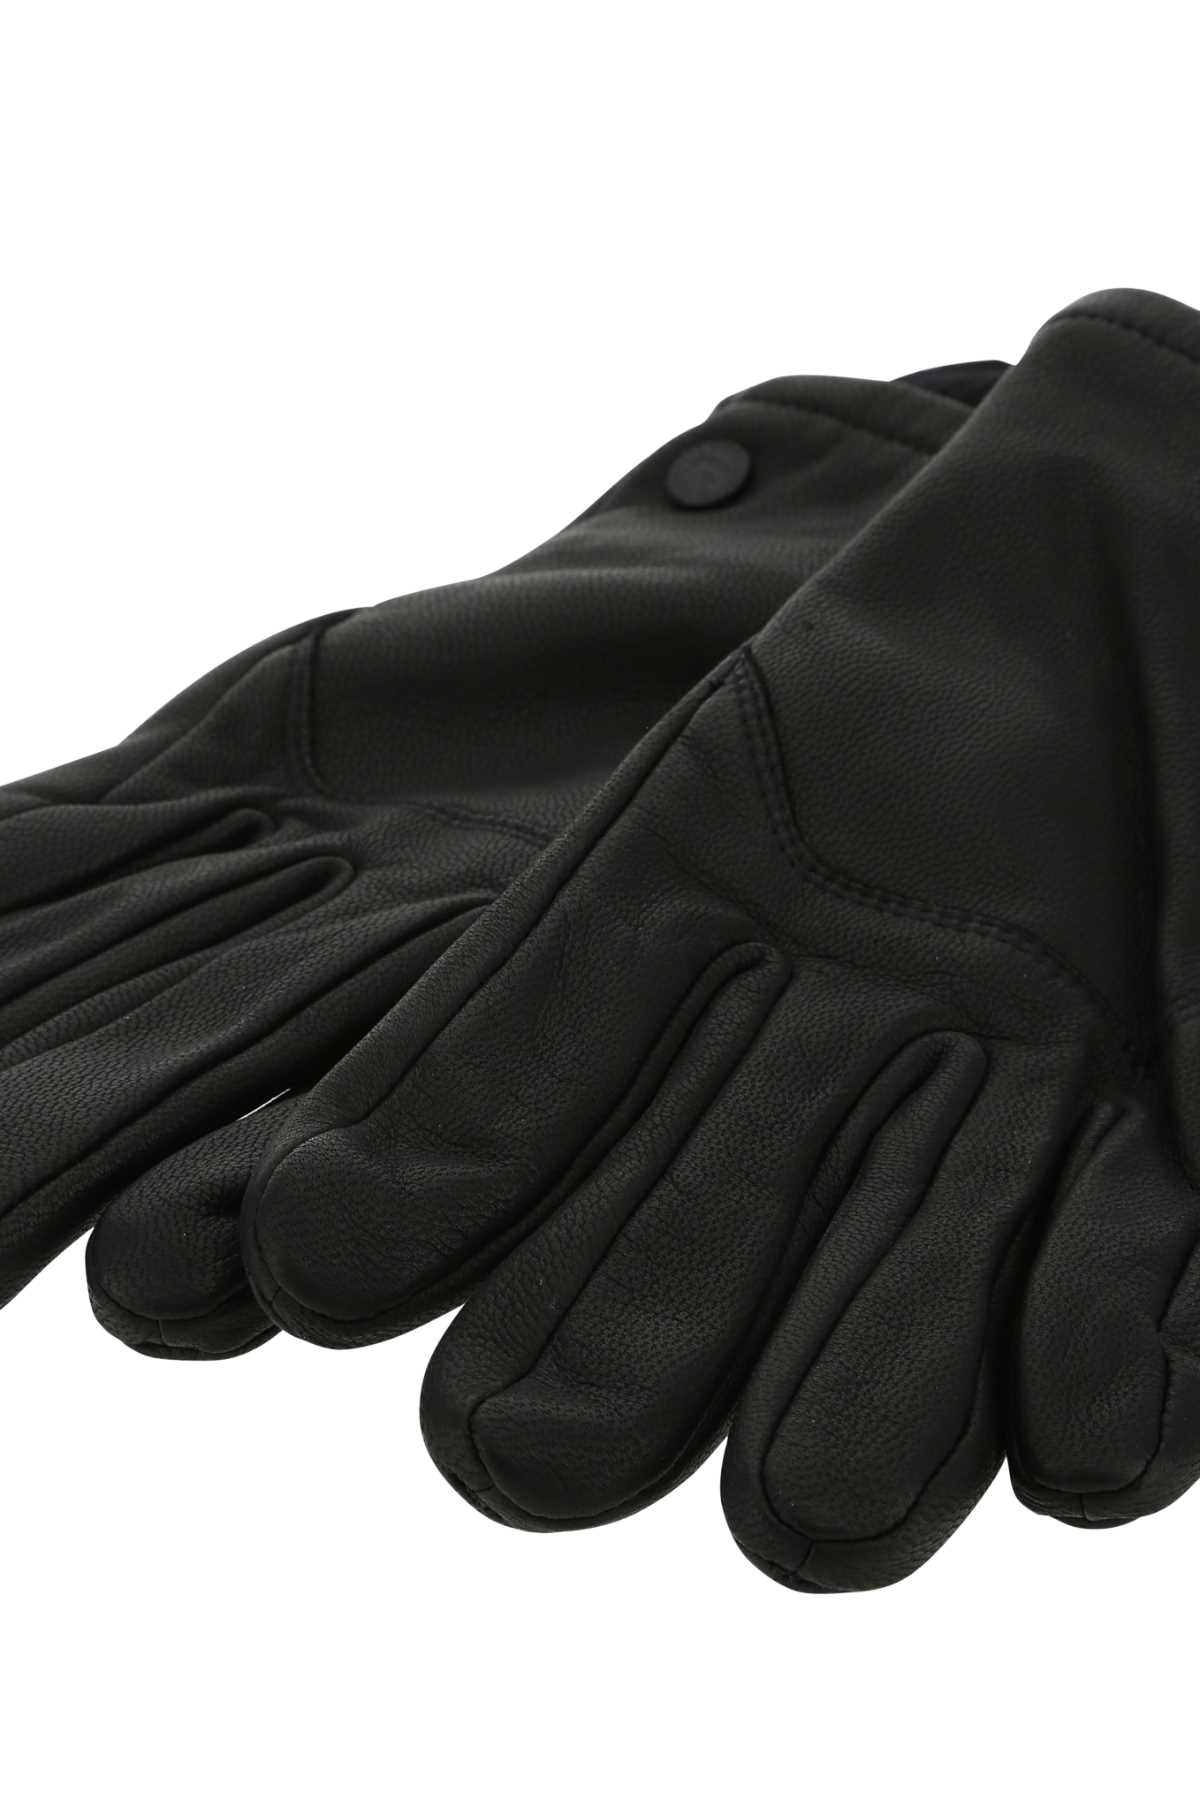 Canada Goose Black Leather Workman Gloves In 61